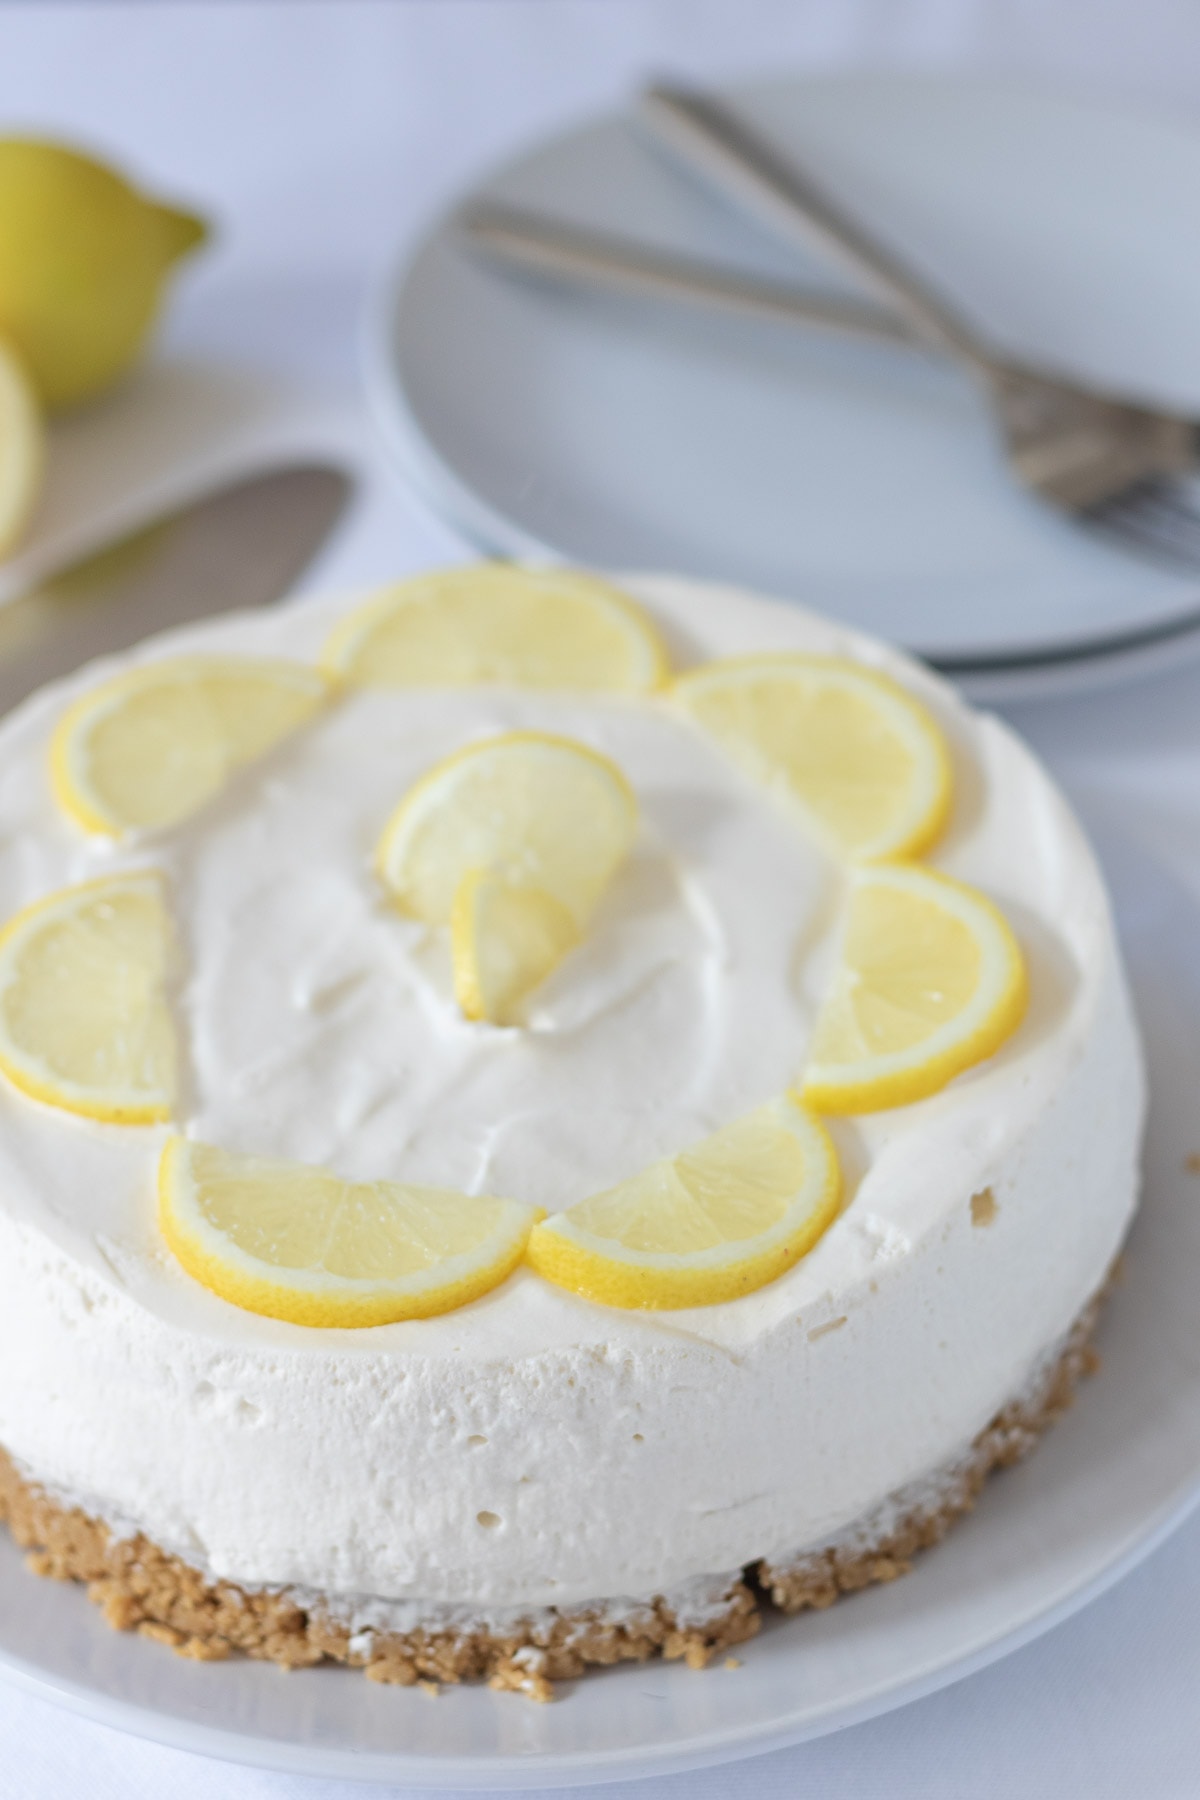 Daily free cheesecake decorated with slices of lemon with serving plates and forks on in the background.